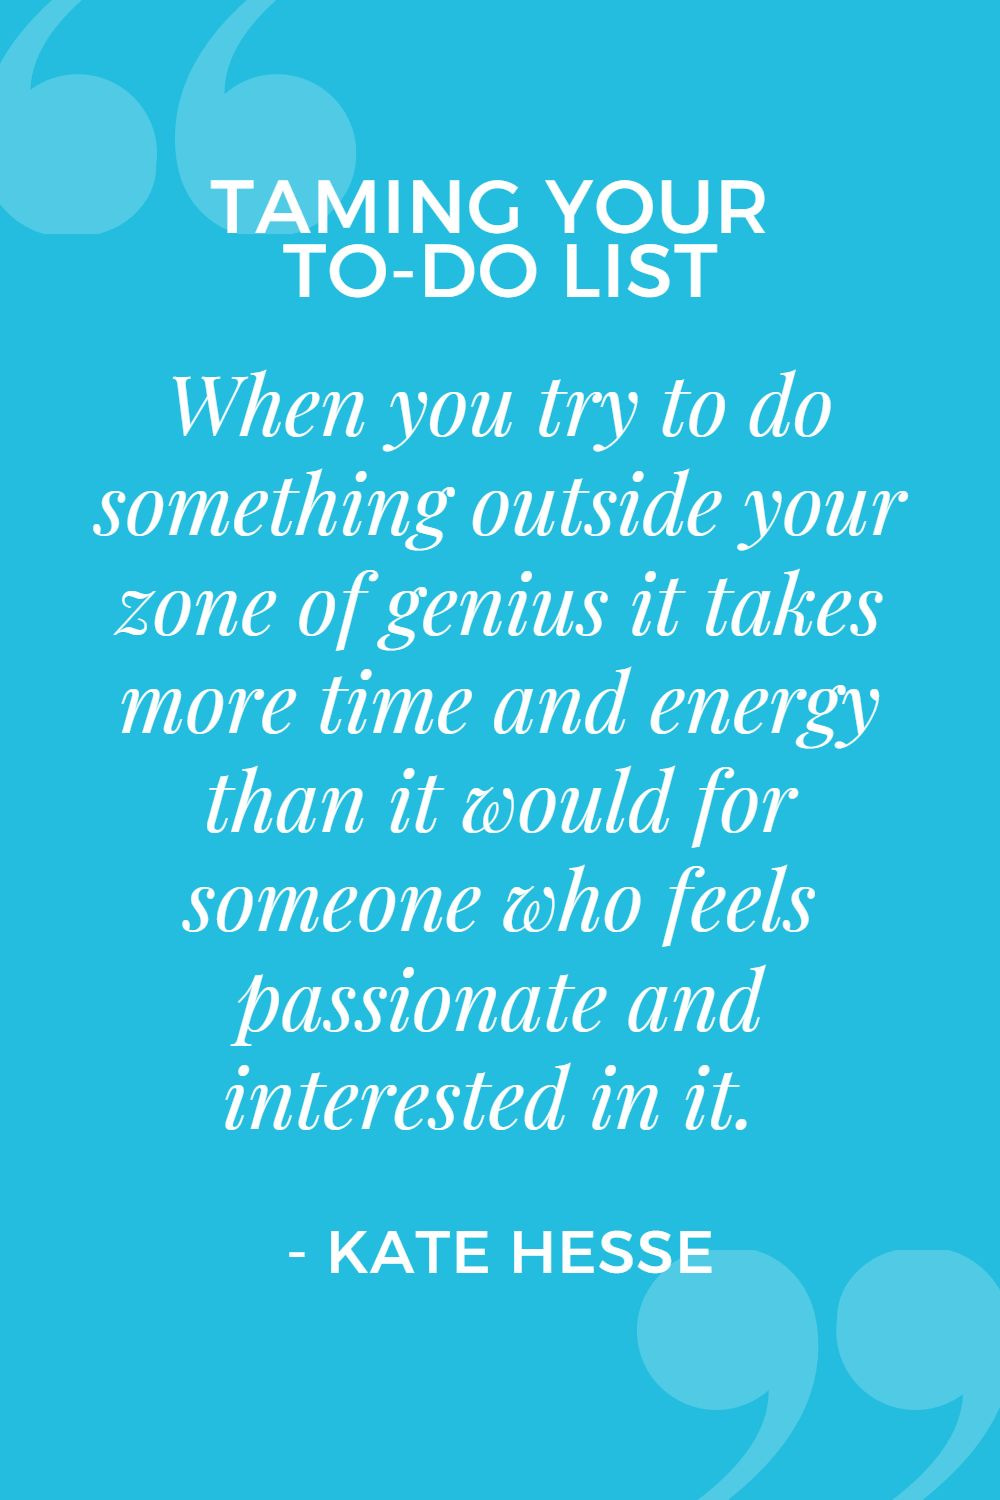 When you try to do something outside your zone of genius, it takes more time and energy than it would for someone who feels passionate and interested in it.